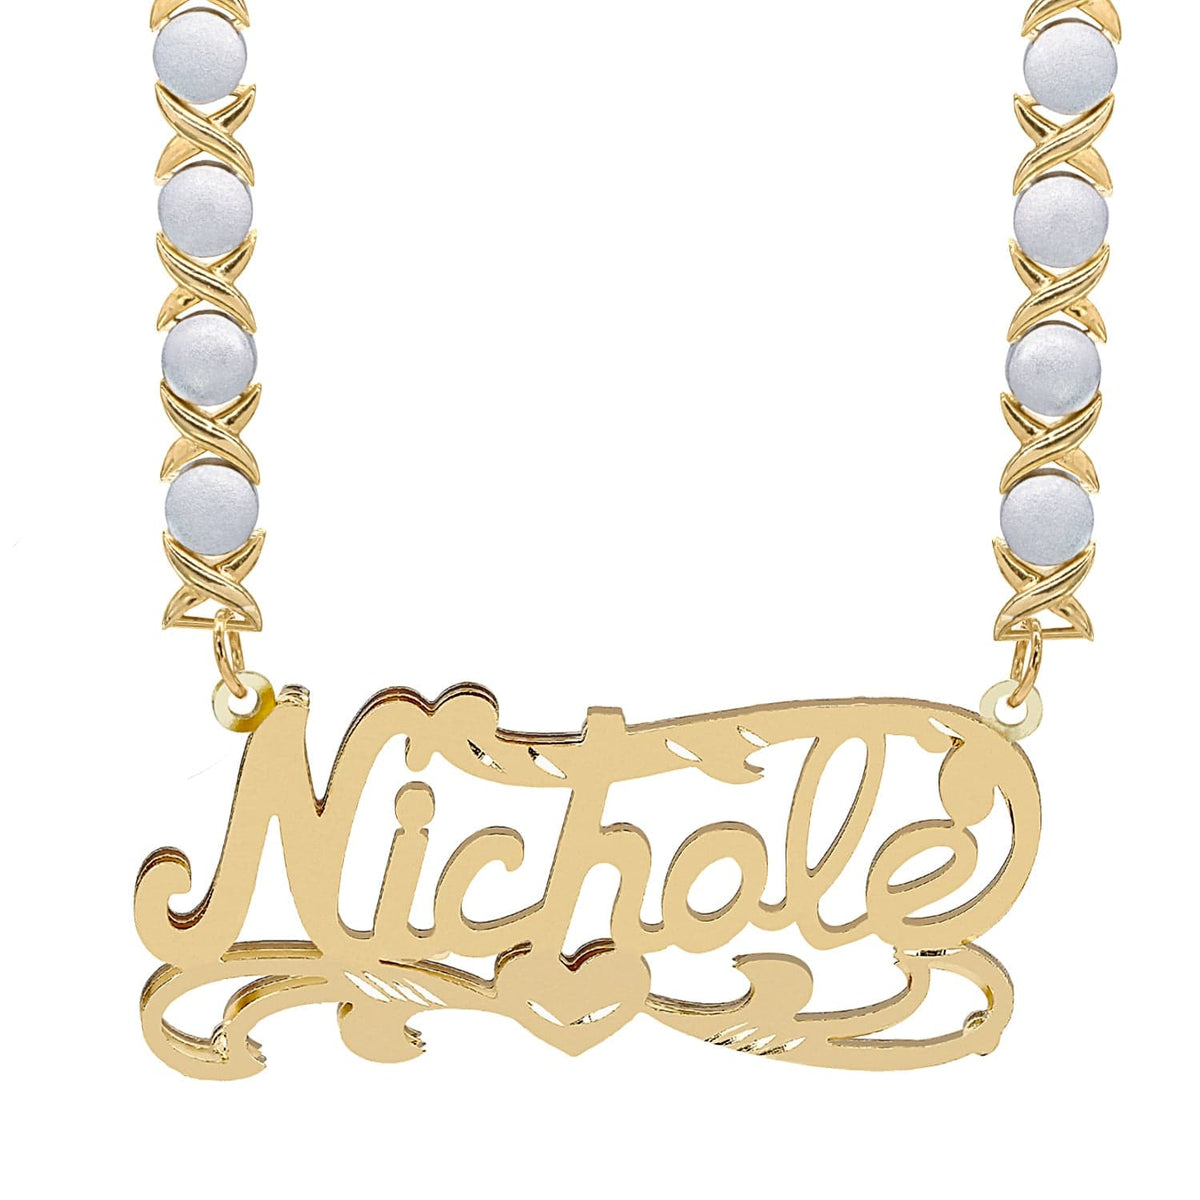 14K Gold over Sterling Silver / Rhodium Xoxo Chain Double Plated Name Necklace w/ Diamond-cut and Rhodium Xoxo Chain